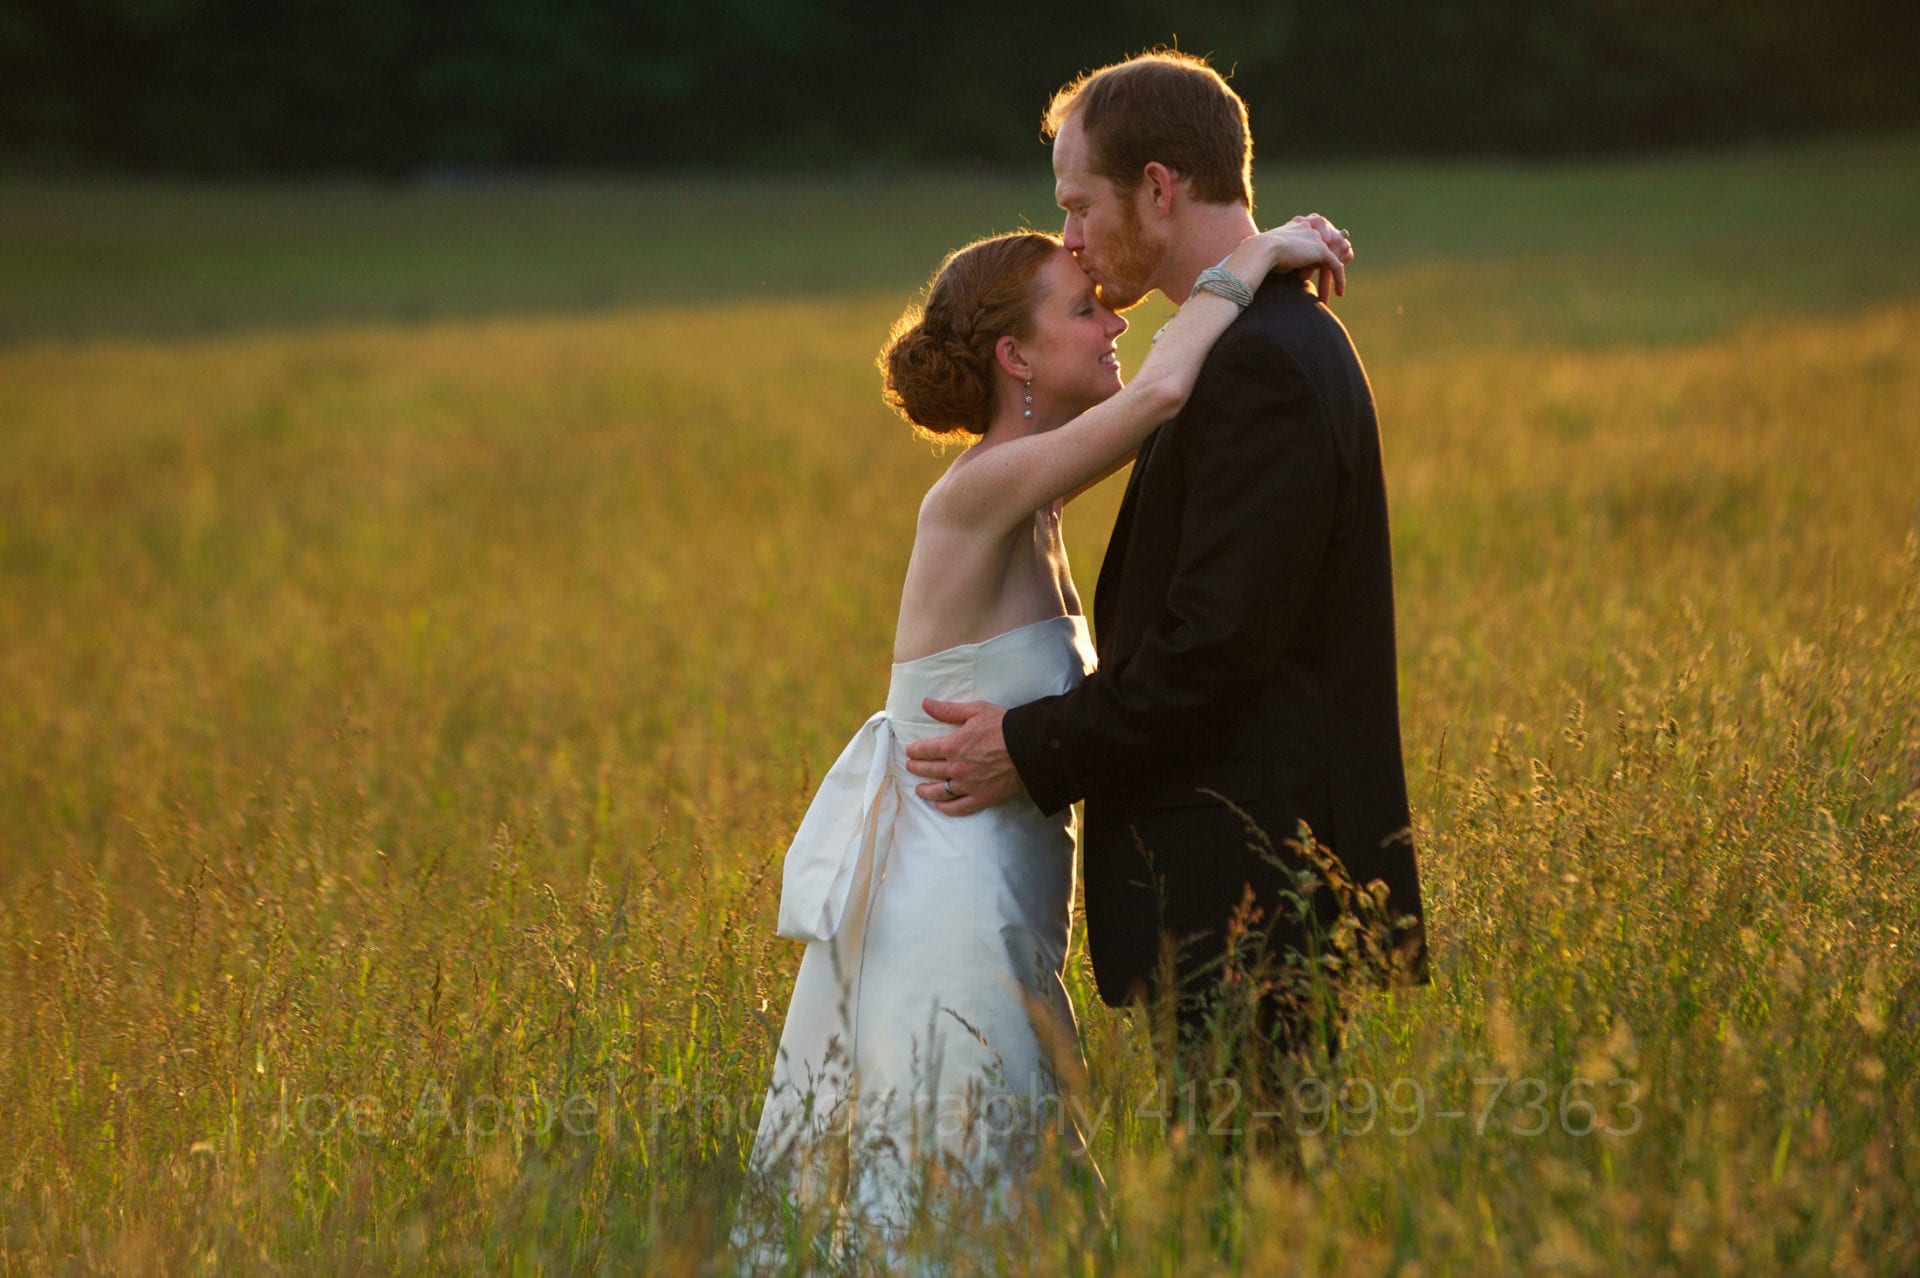 A red-headed couple embrace in a field of high grass. The sunlight rims them as the grass glows golden. Armstrong Farms Weddings